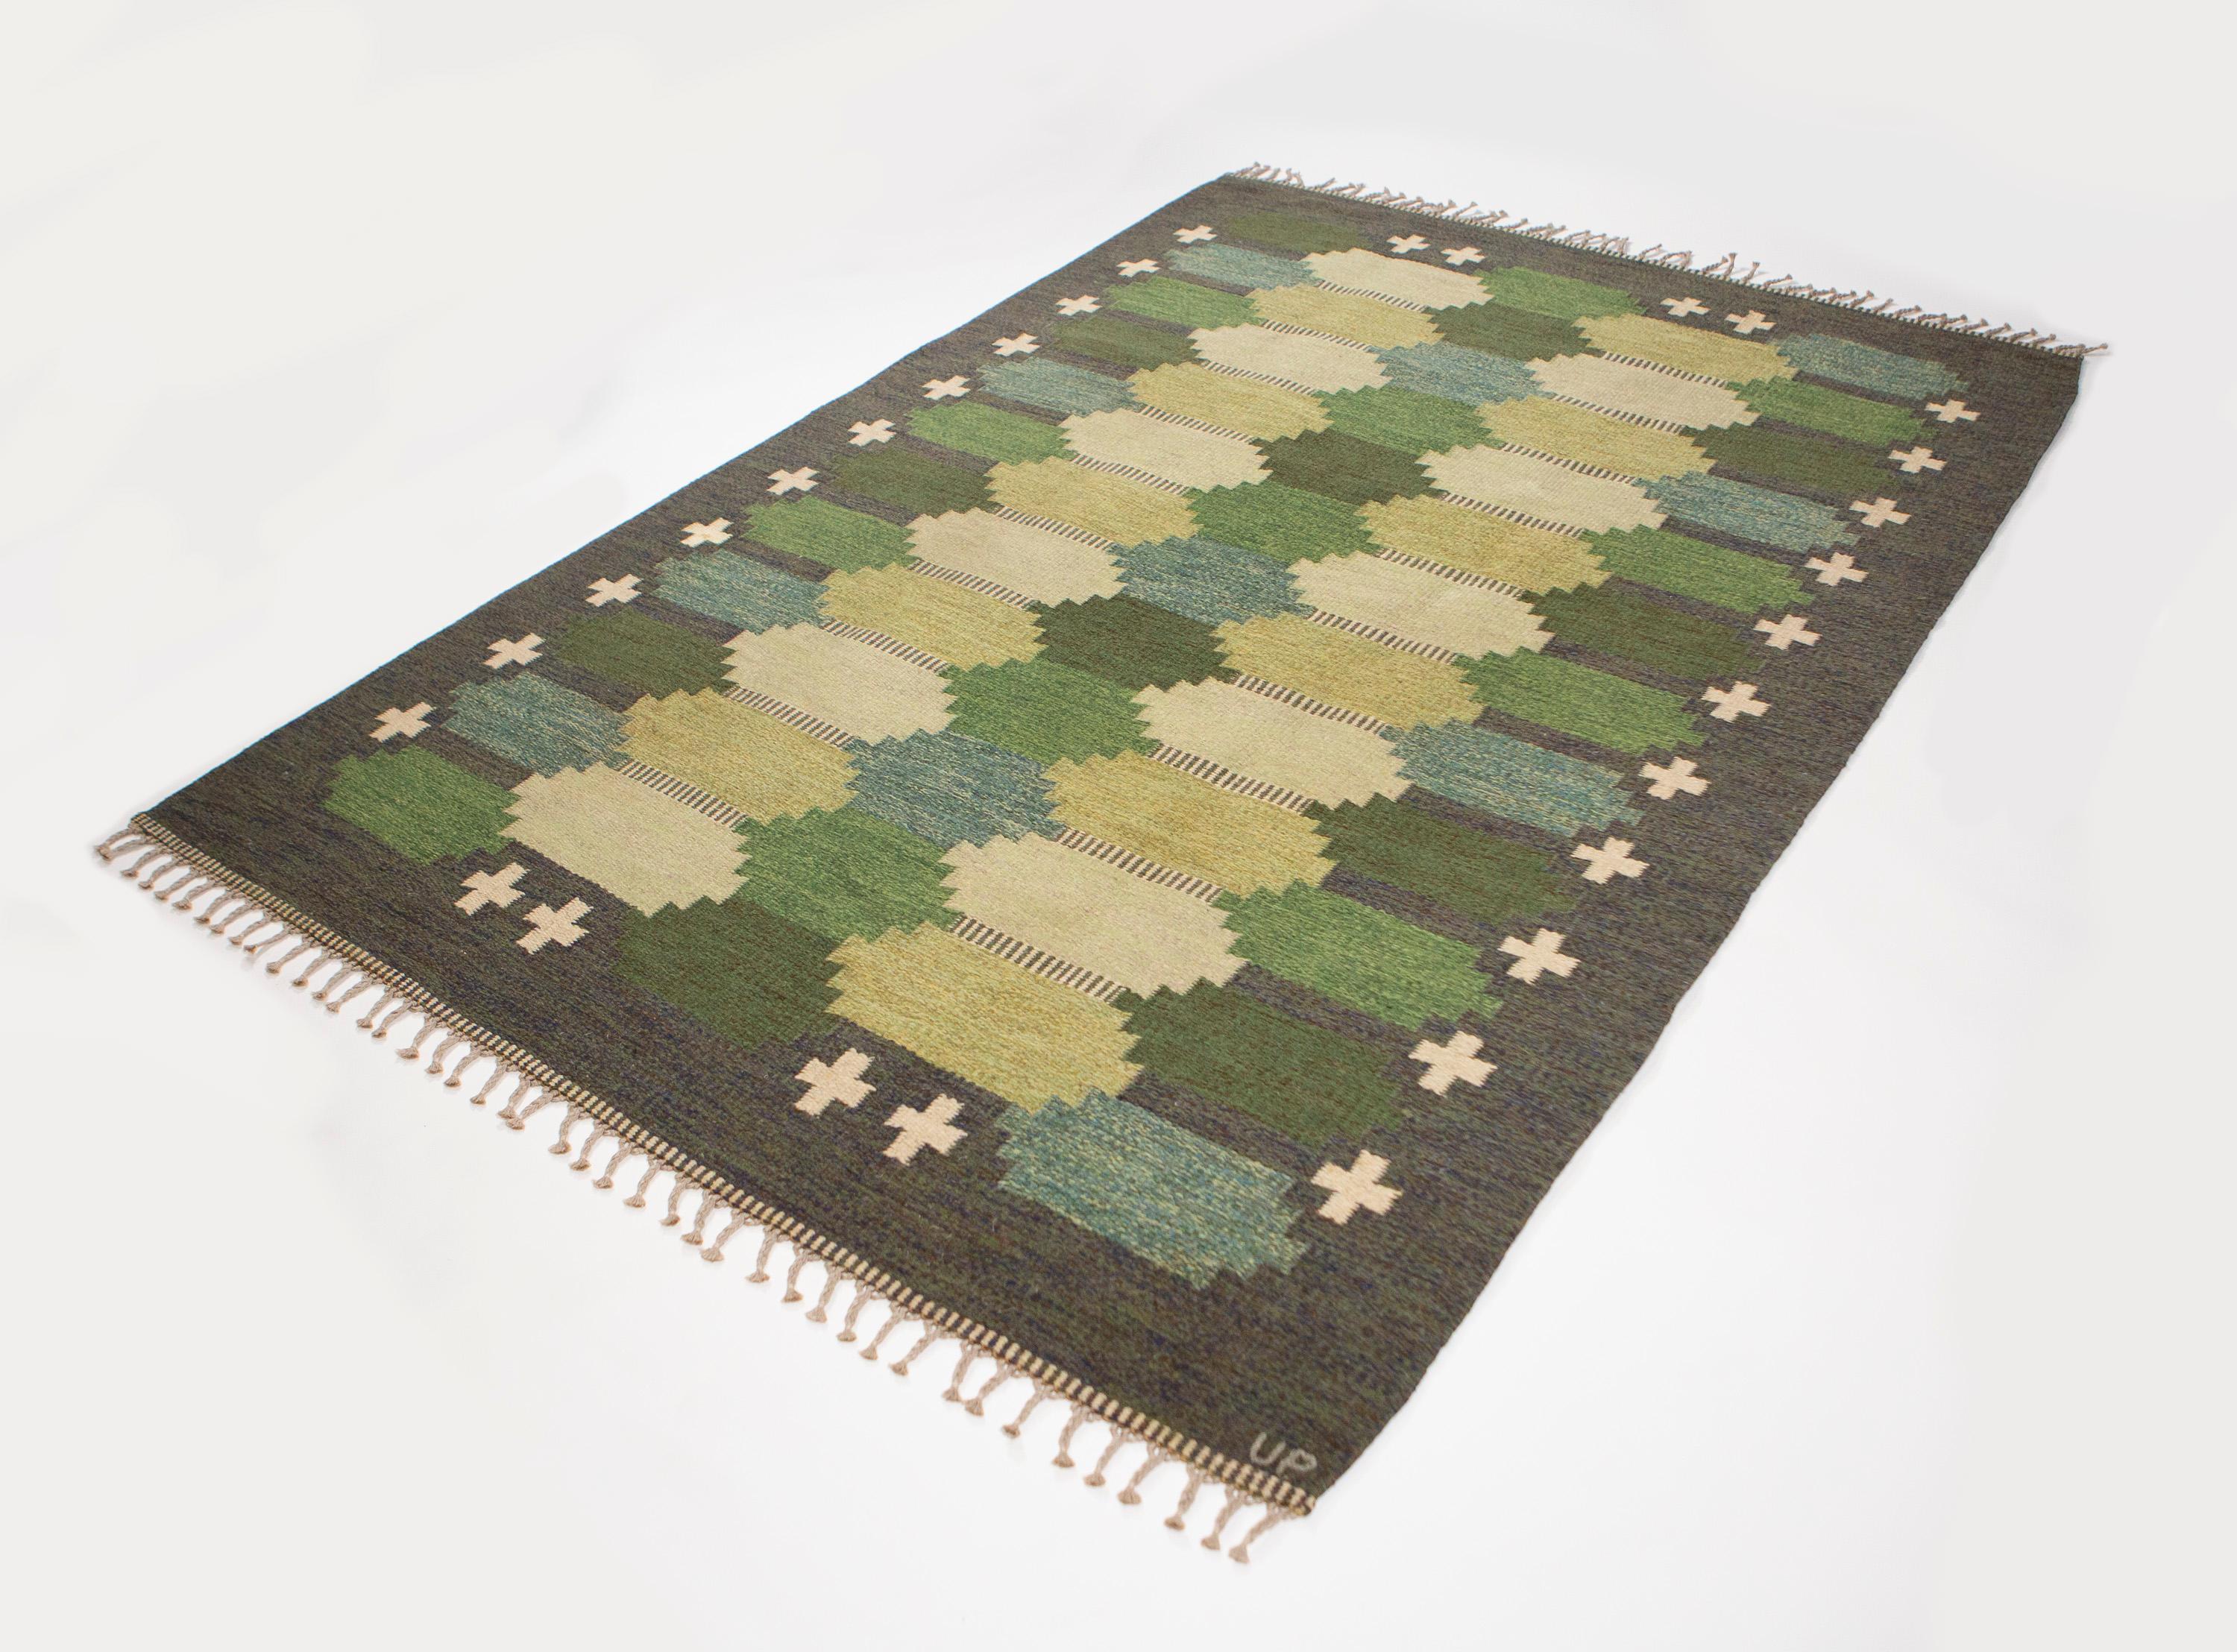 Ulla Parkdal Green Swedish Flat Weave Hand Woven Rug Signed Up Sweden, 1960's

A dark green melange ground with dense rows of stepped medallions in a variety of teal, cream, Olive and ivory nuances. A framework of green geometric shapes.

 